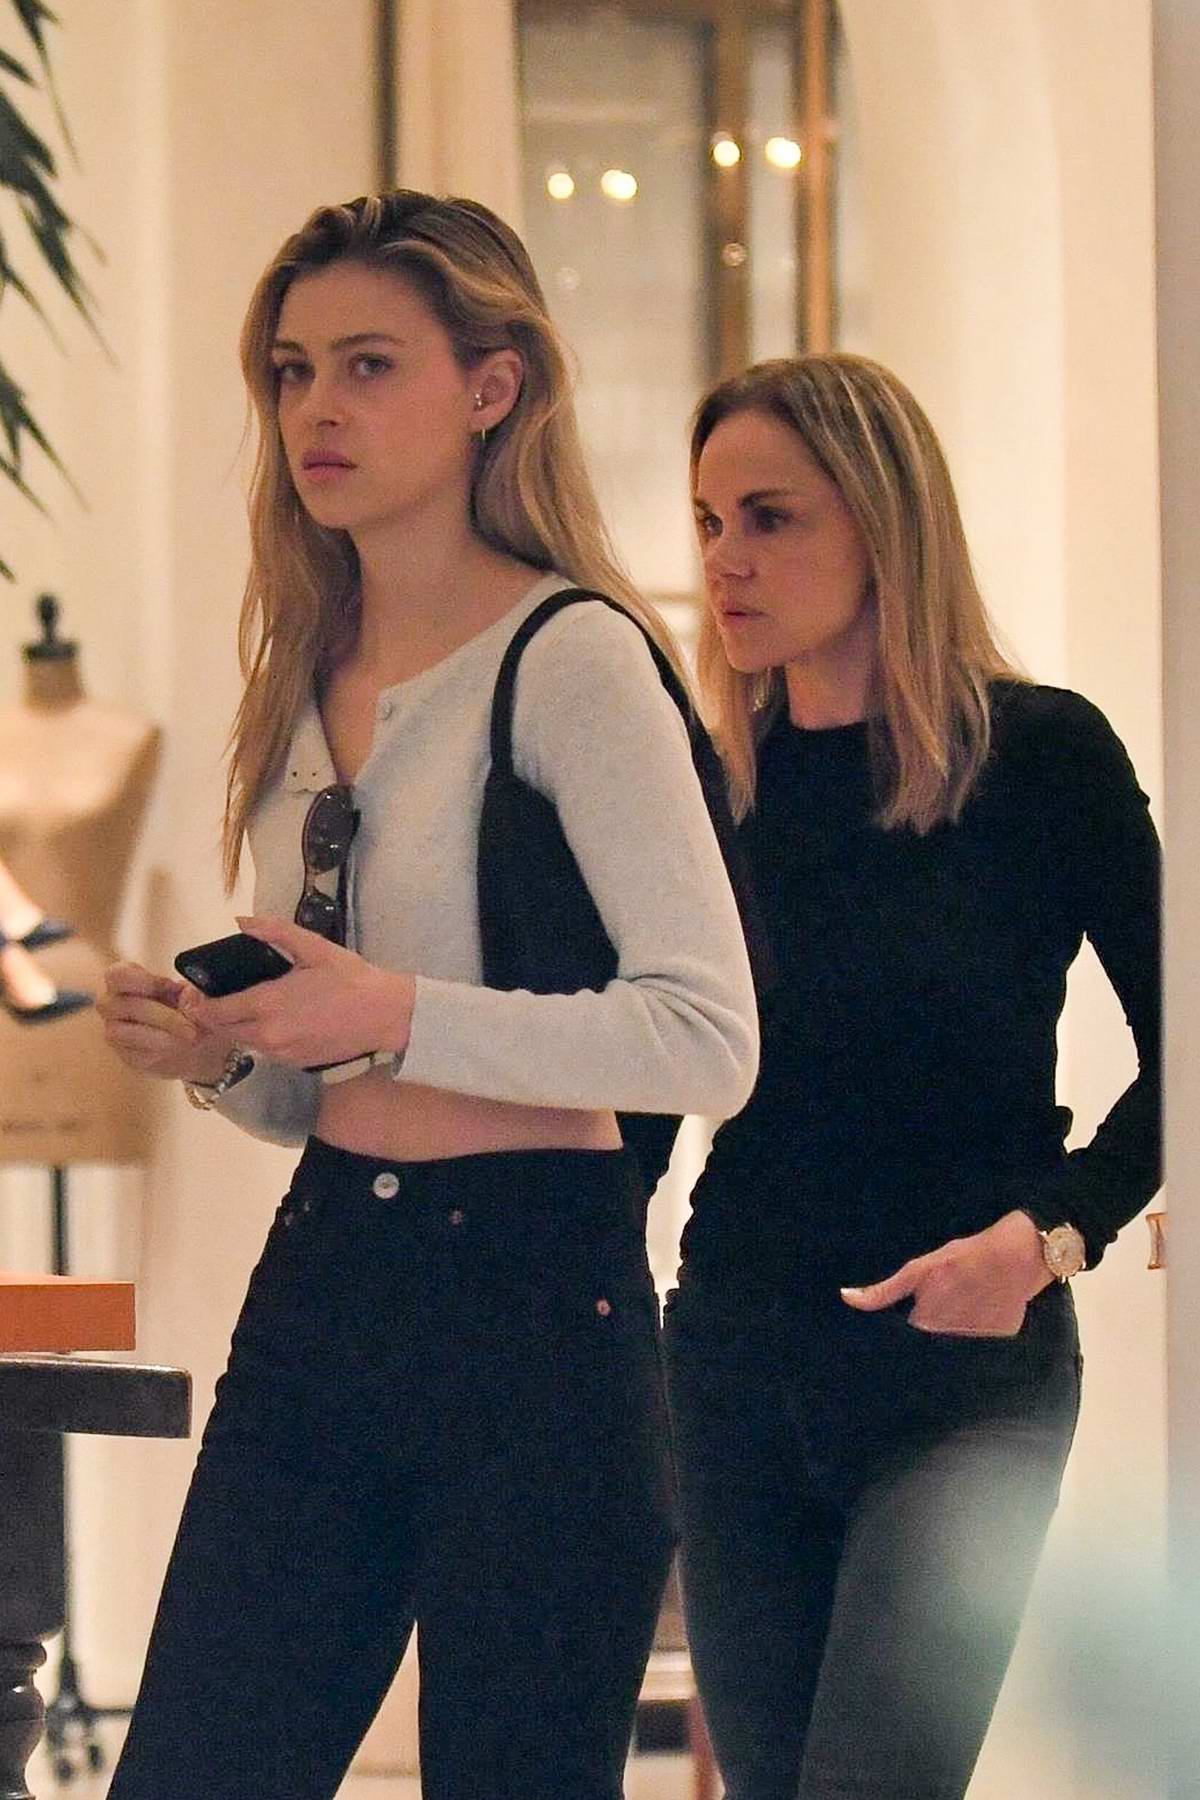 nicola peltz getting some shopping done at yves saint laurent with her